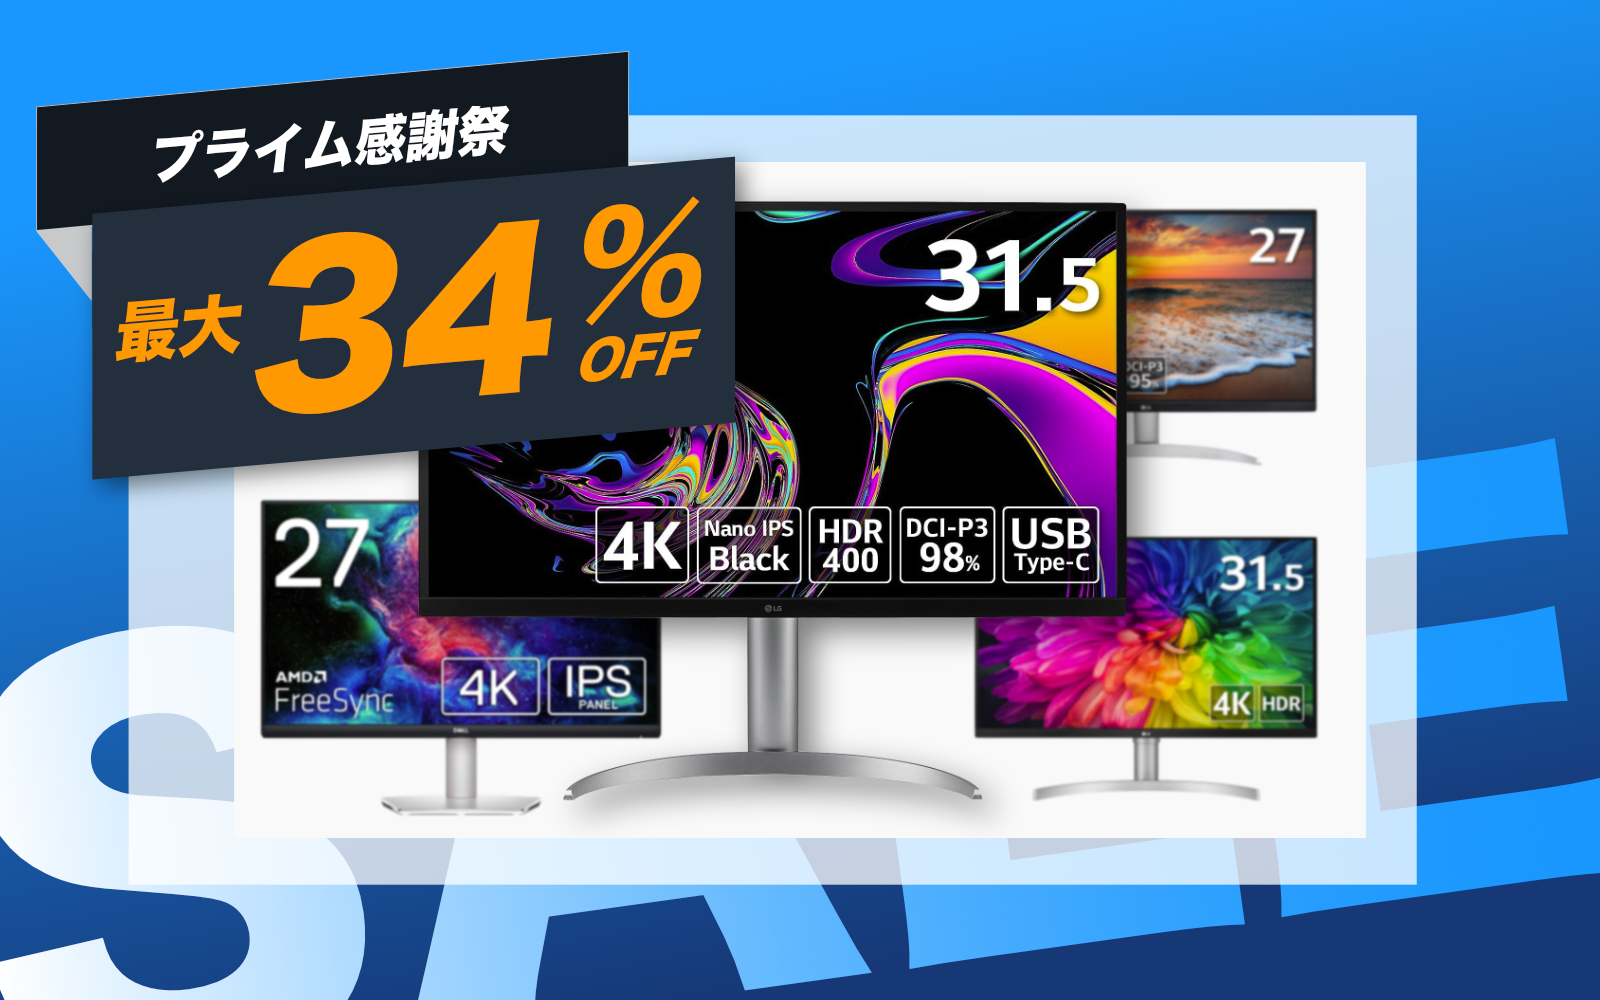 DELL-and-LG-displays-on-sale.jpg